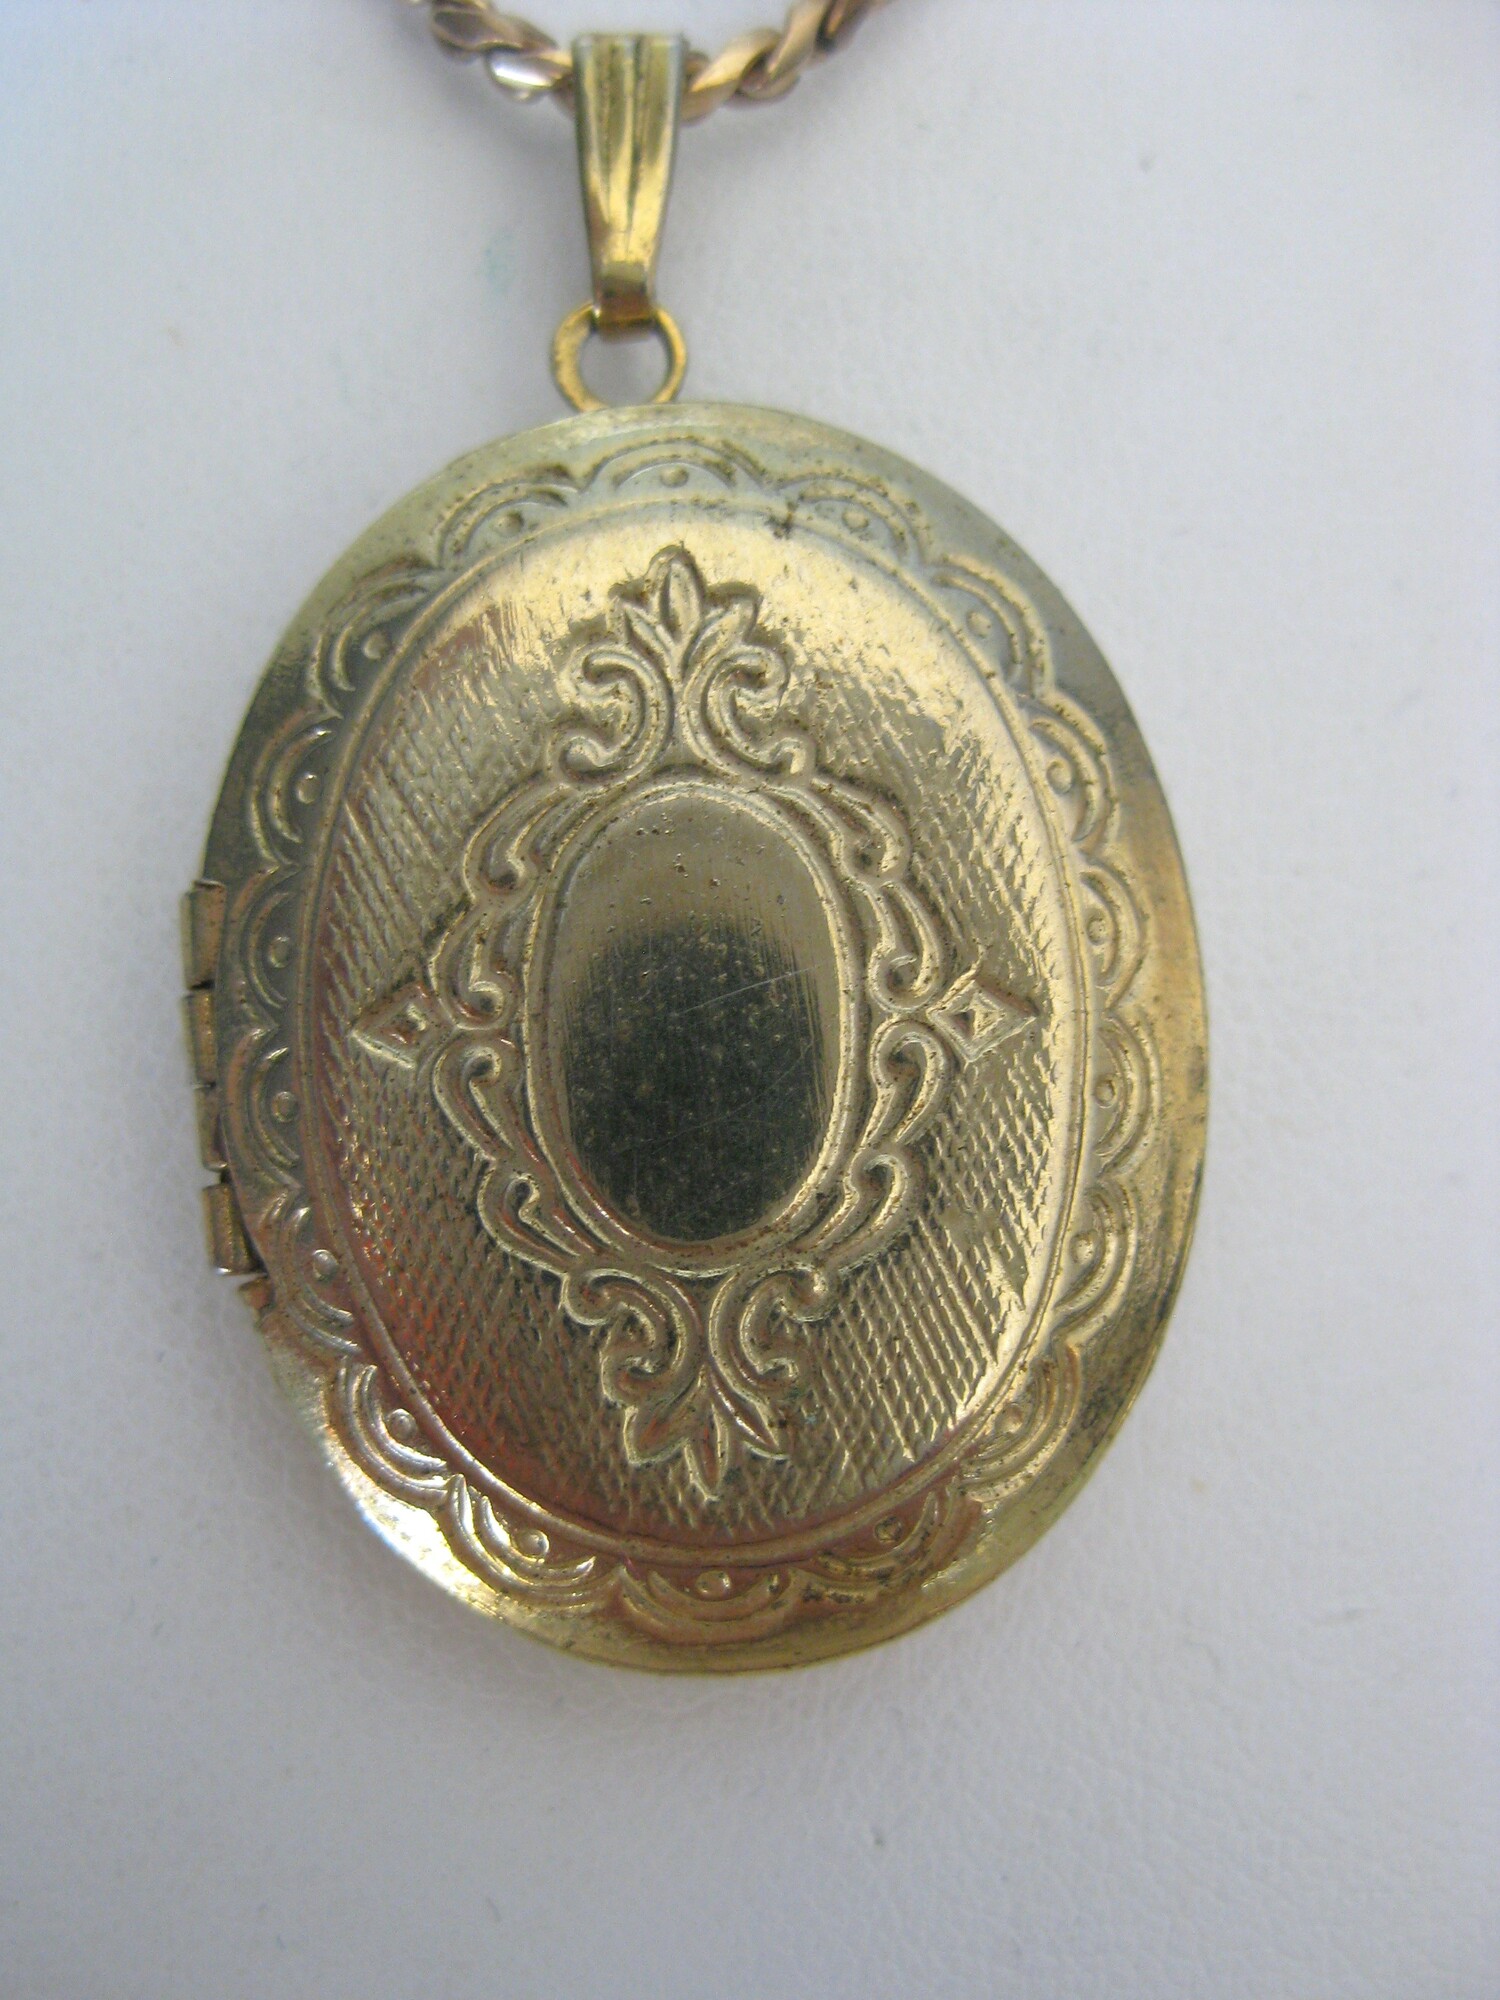 Gold Locket Gold Fill Ch, None, Size: None

Nice sized locket pendant necklace to keep tiny pictures of your special ones close to your heart.
Super gift for mothers and grandmothers.  Pretty etching on the front

Gold-tone metal locket and chain
The spring loop on the chain is marked 1/20 12 KT GF
Stays closed nice and  firmly.
Can hold two pictures

Length of chain: 14.75
Width of locket: 7/8 close , space for the pictures is about .5

Thanks for looking!

#50979